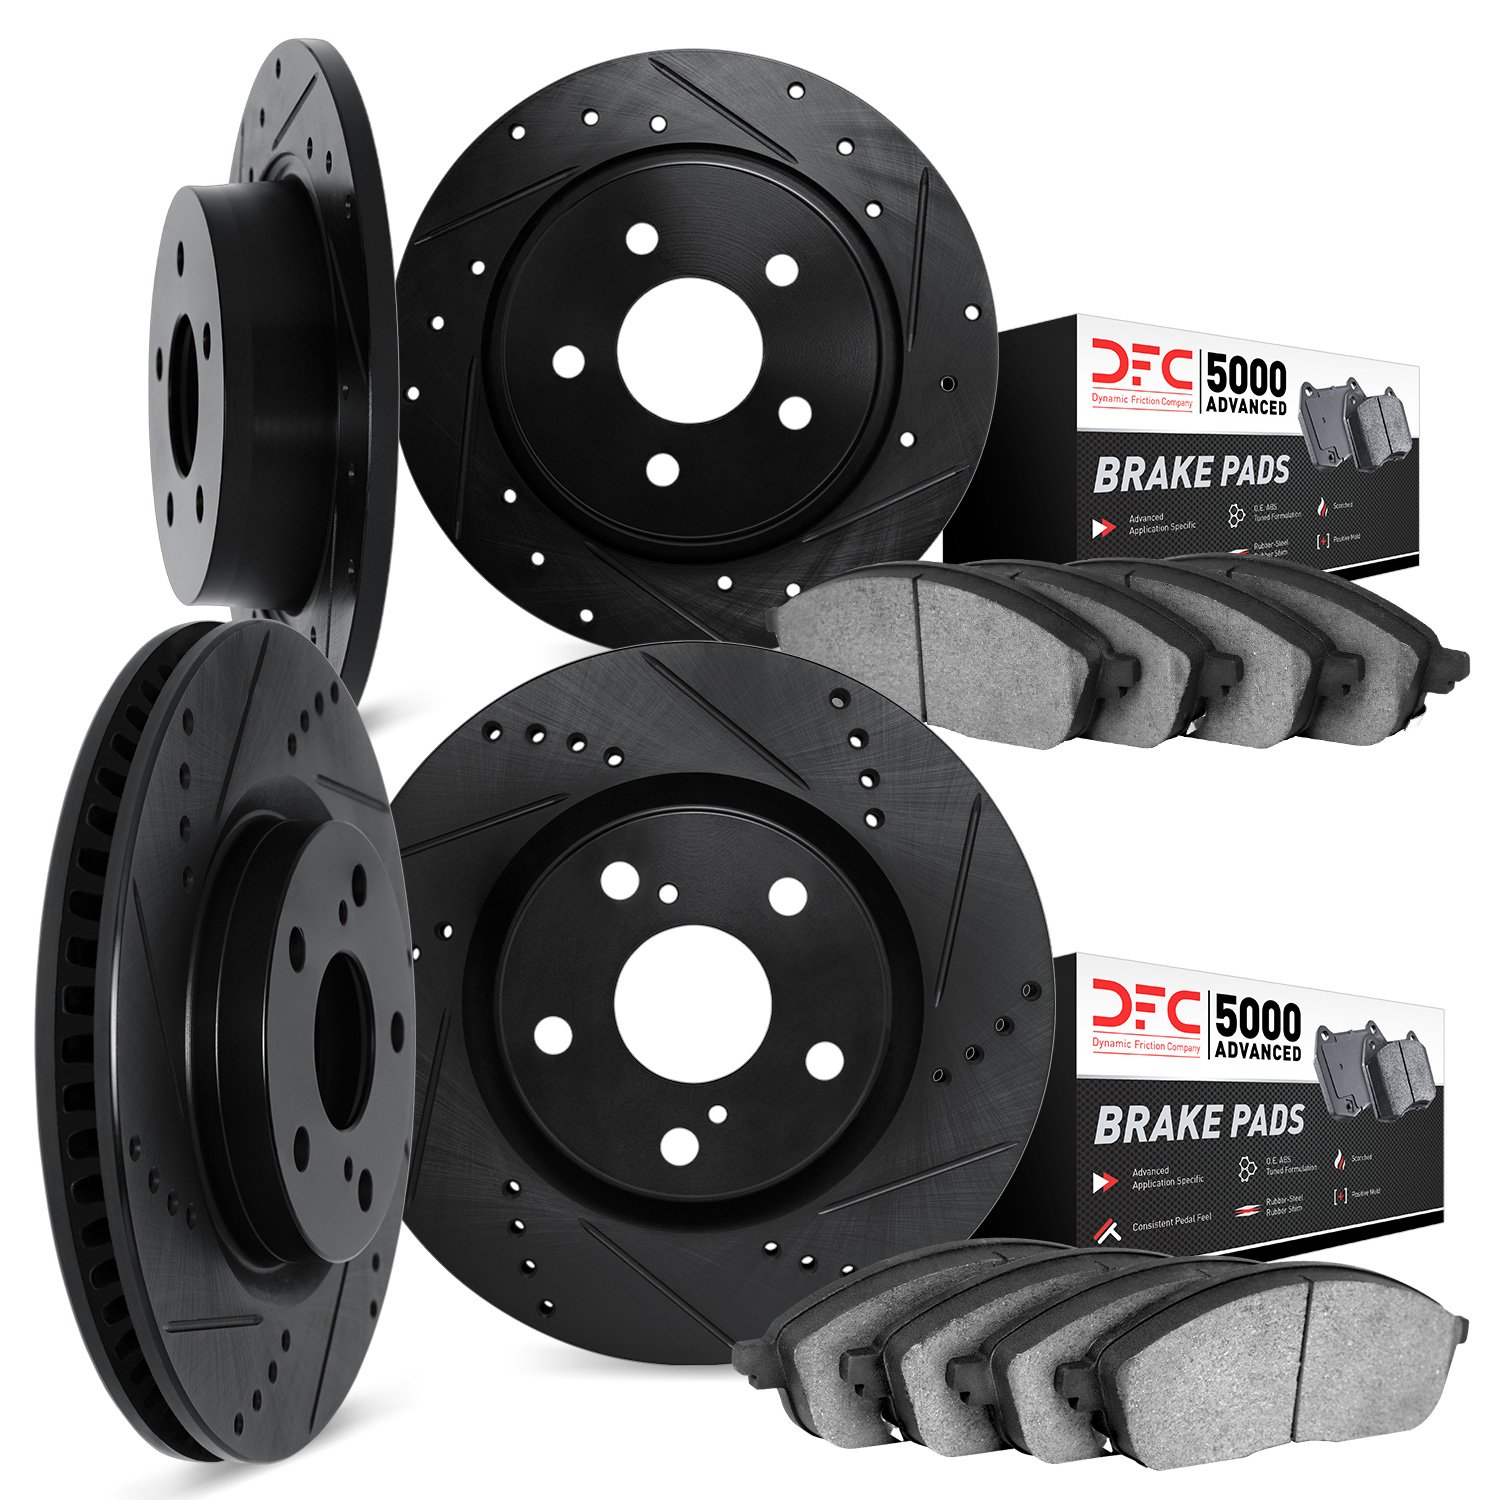 8504-76150 Drilled/Slotted Brake Rotors w/5000 Advanced Brake Pads Kit [Black], 2004-2008 Lexus/Toyota/Scion, Position: Front an